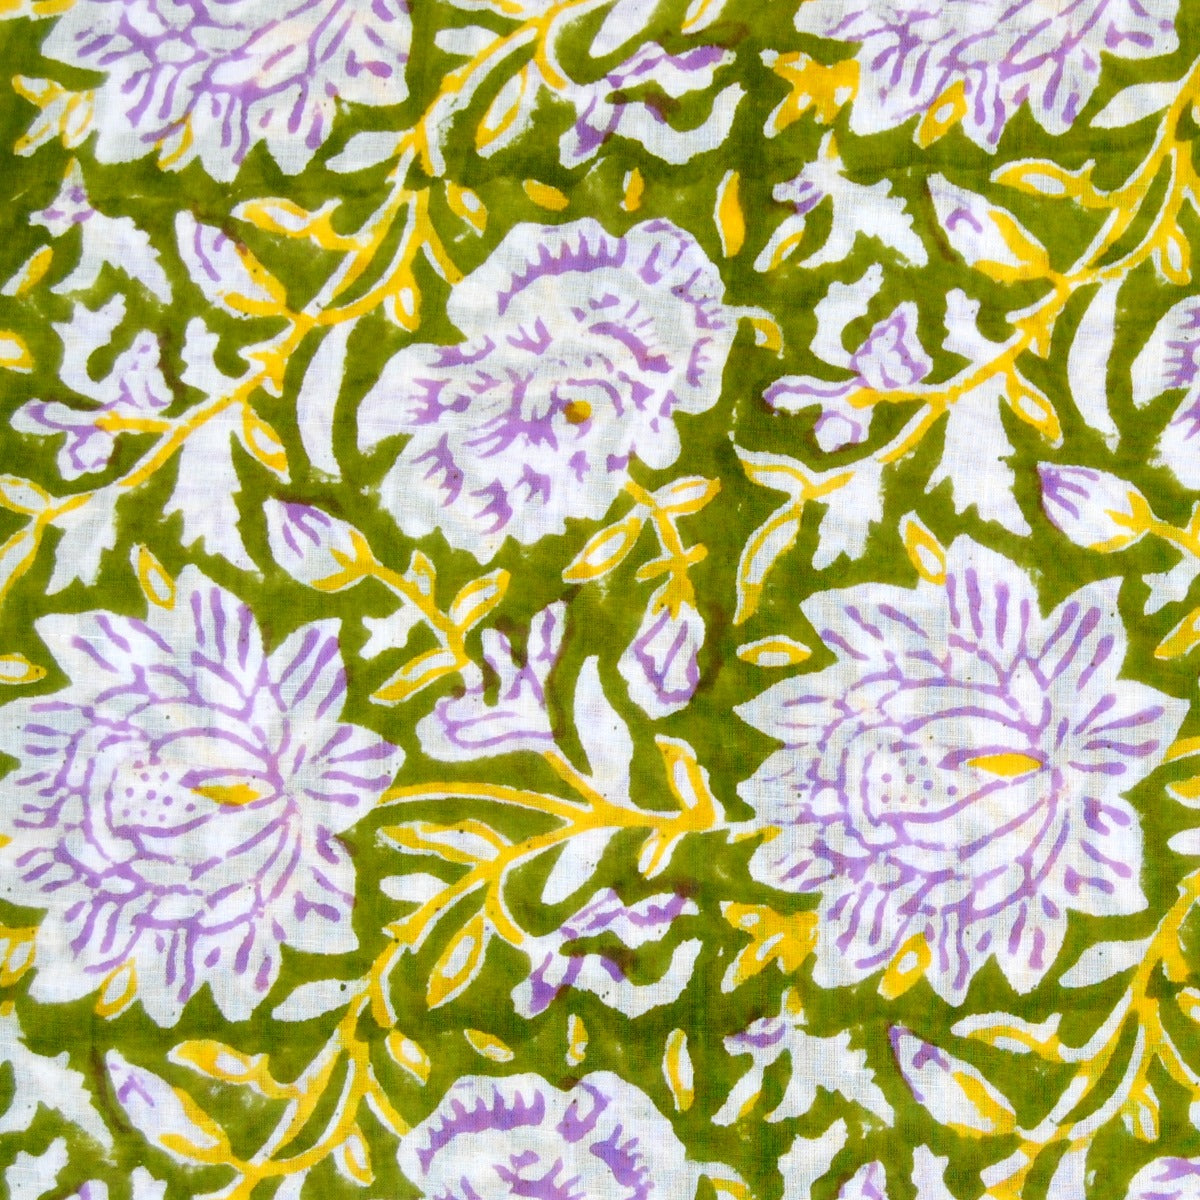 Multicolored Floral Print Cotton Fabric In Wholesale Price-CraftJaipur